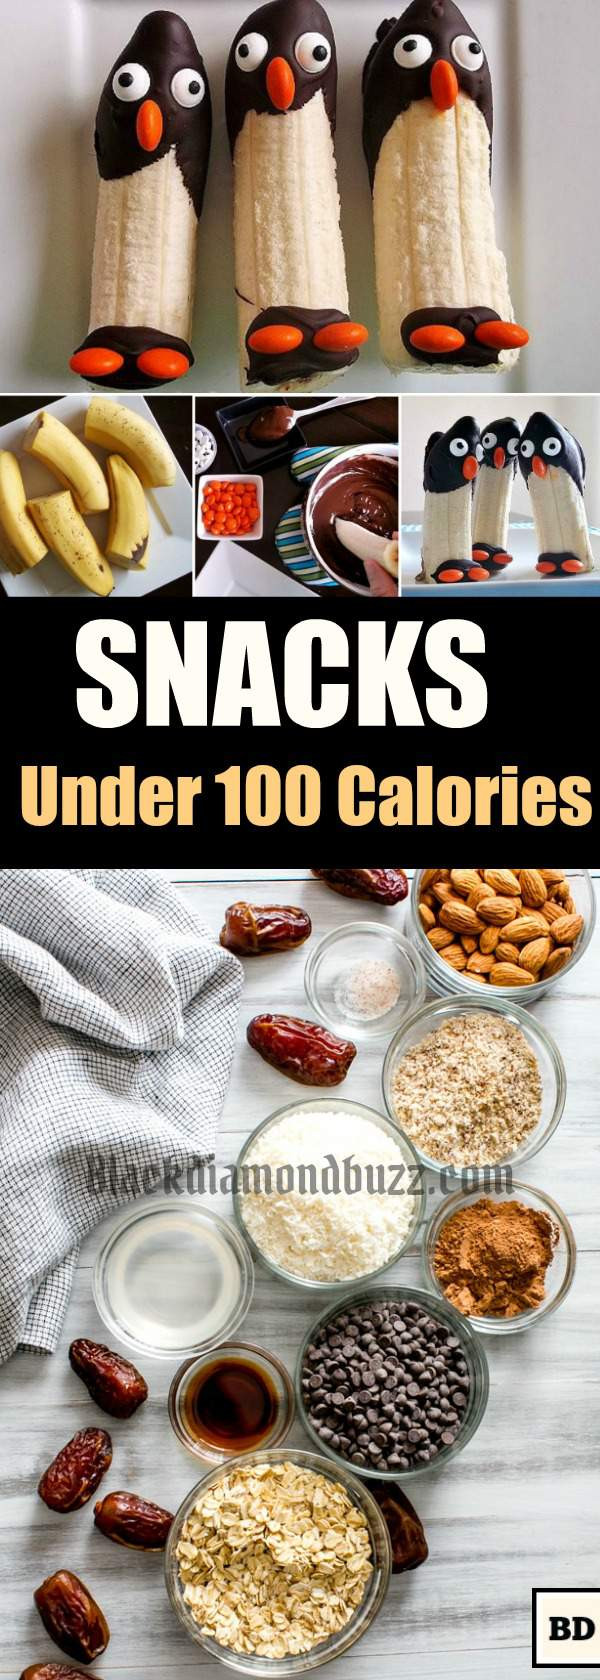 Low Calorie Crackers
 10 Best Easy Healthy Low Calorie Snacks for Weight Loss